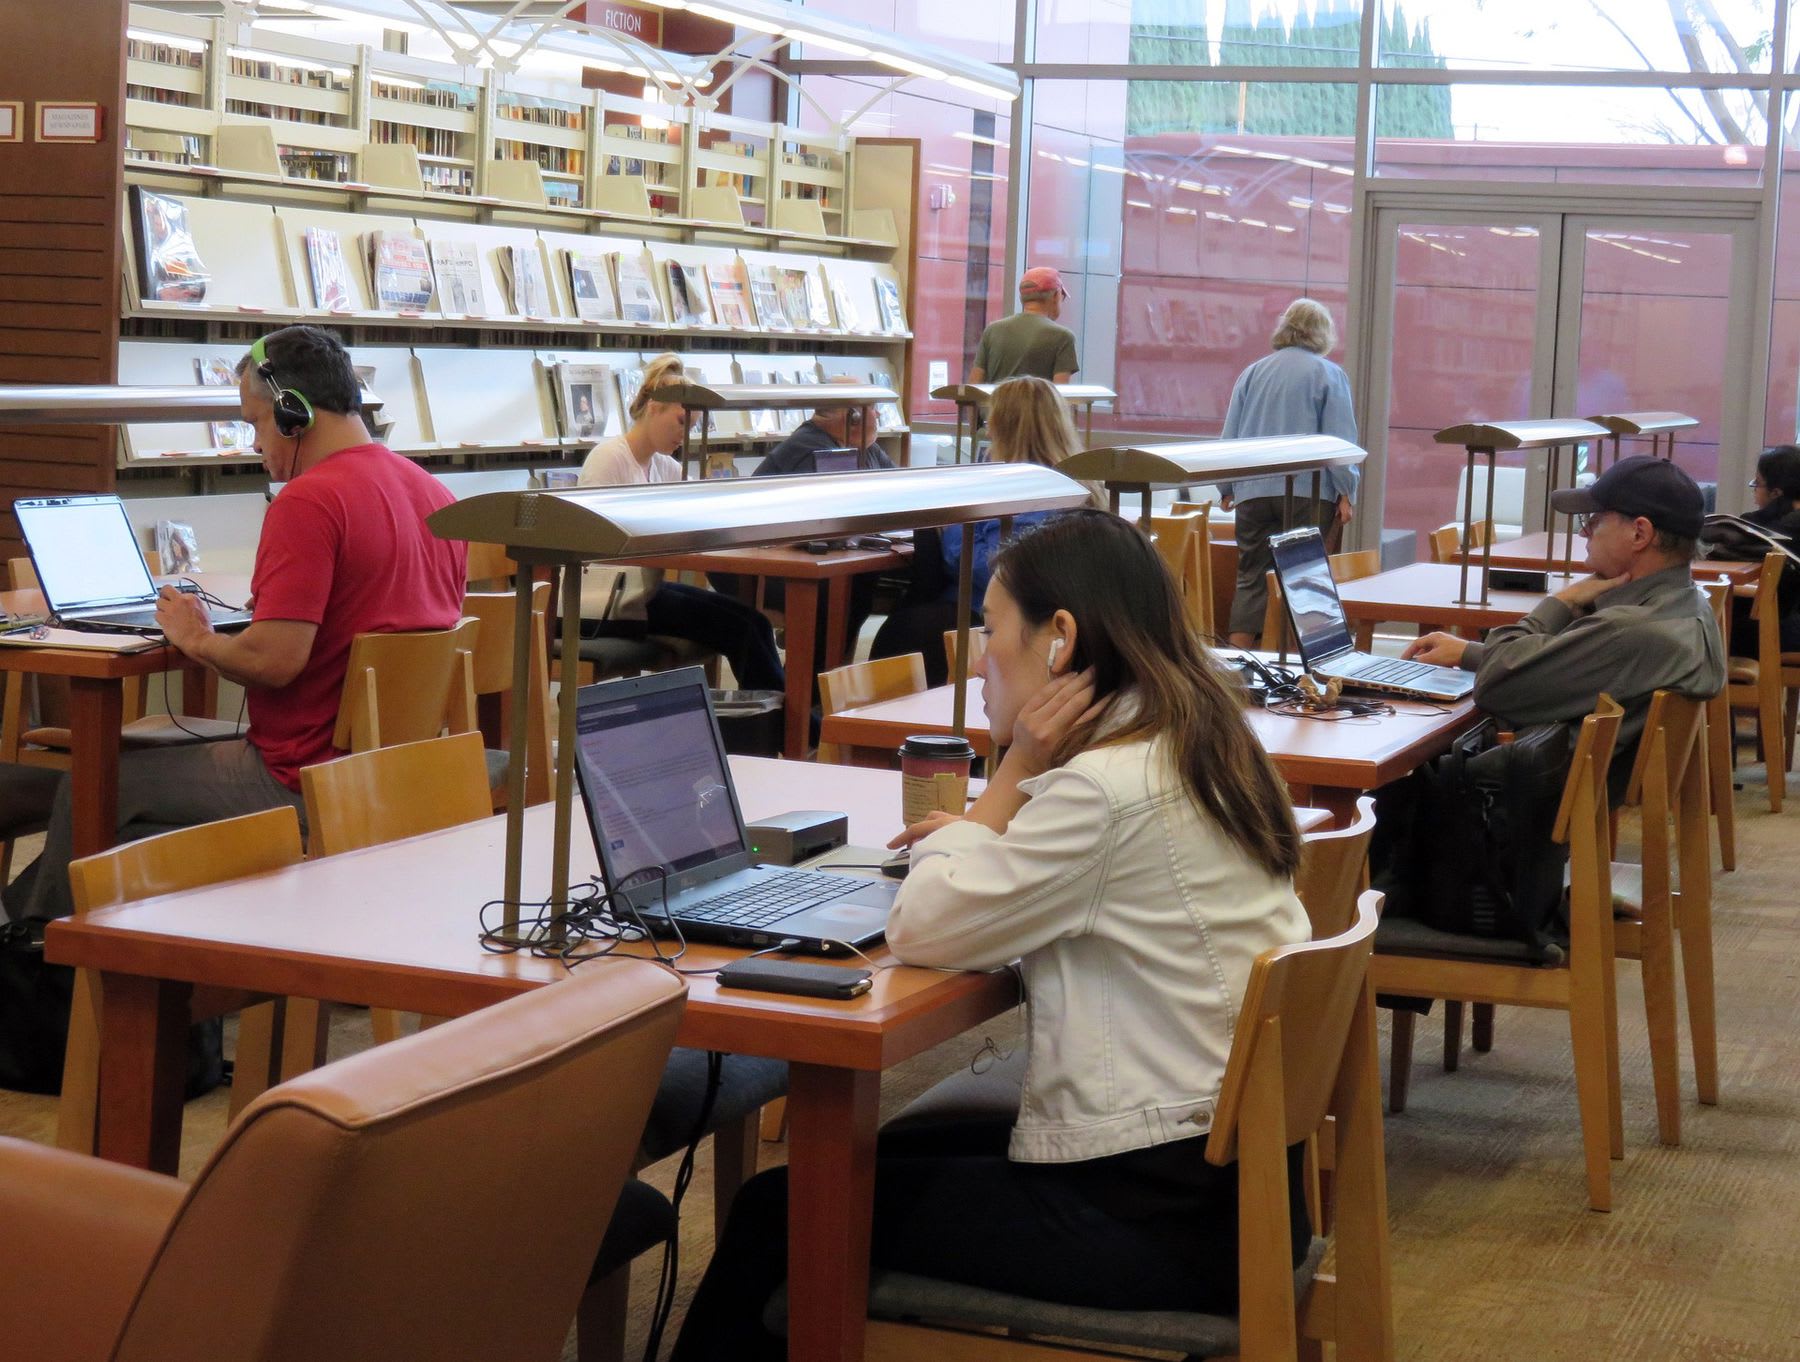 Students busy with their school work at a library